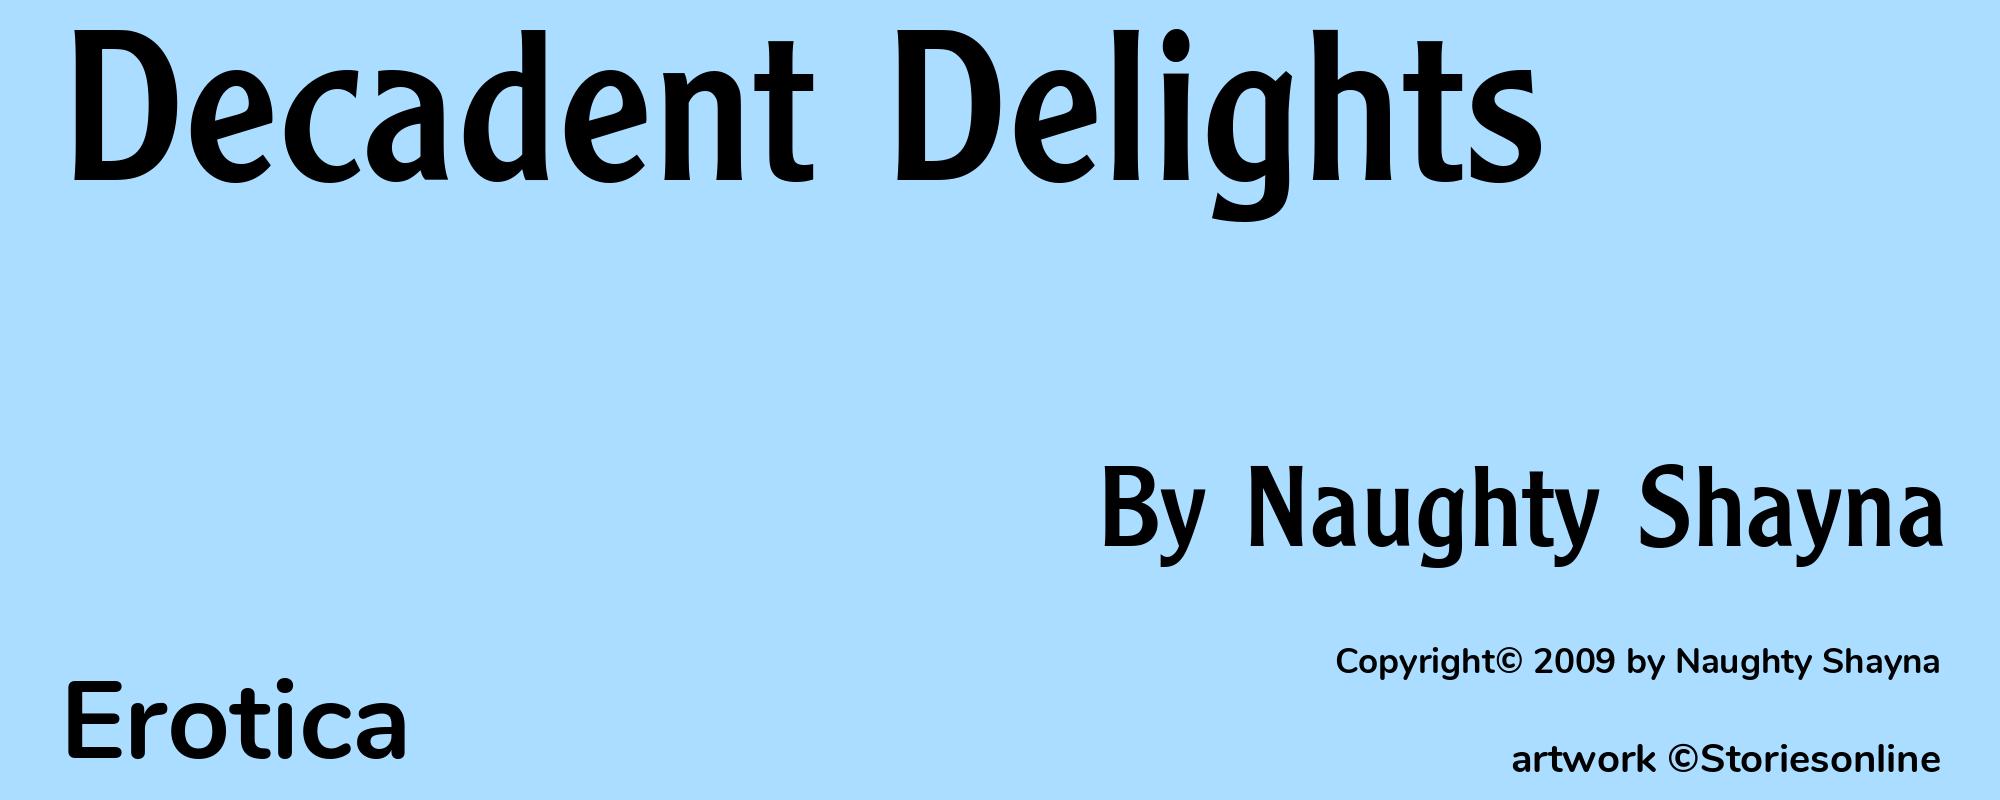 Decadent Delights - Cover